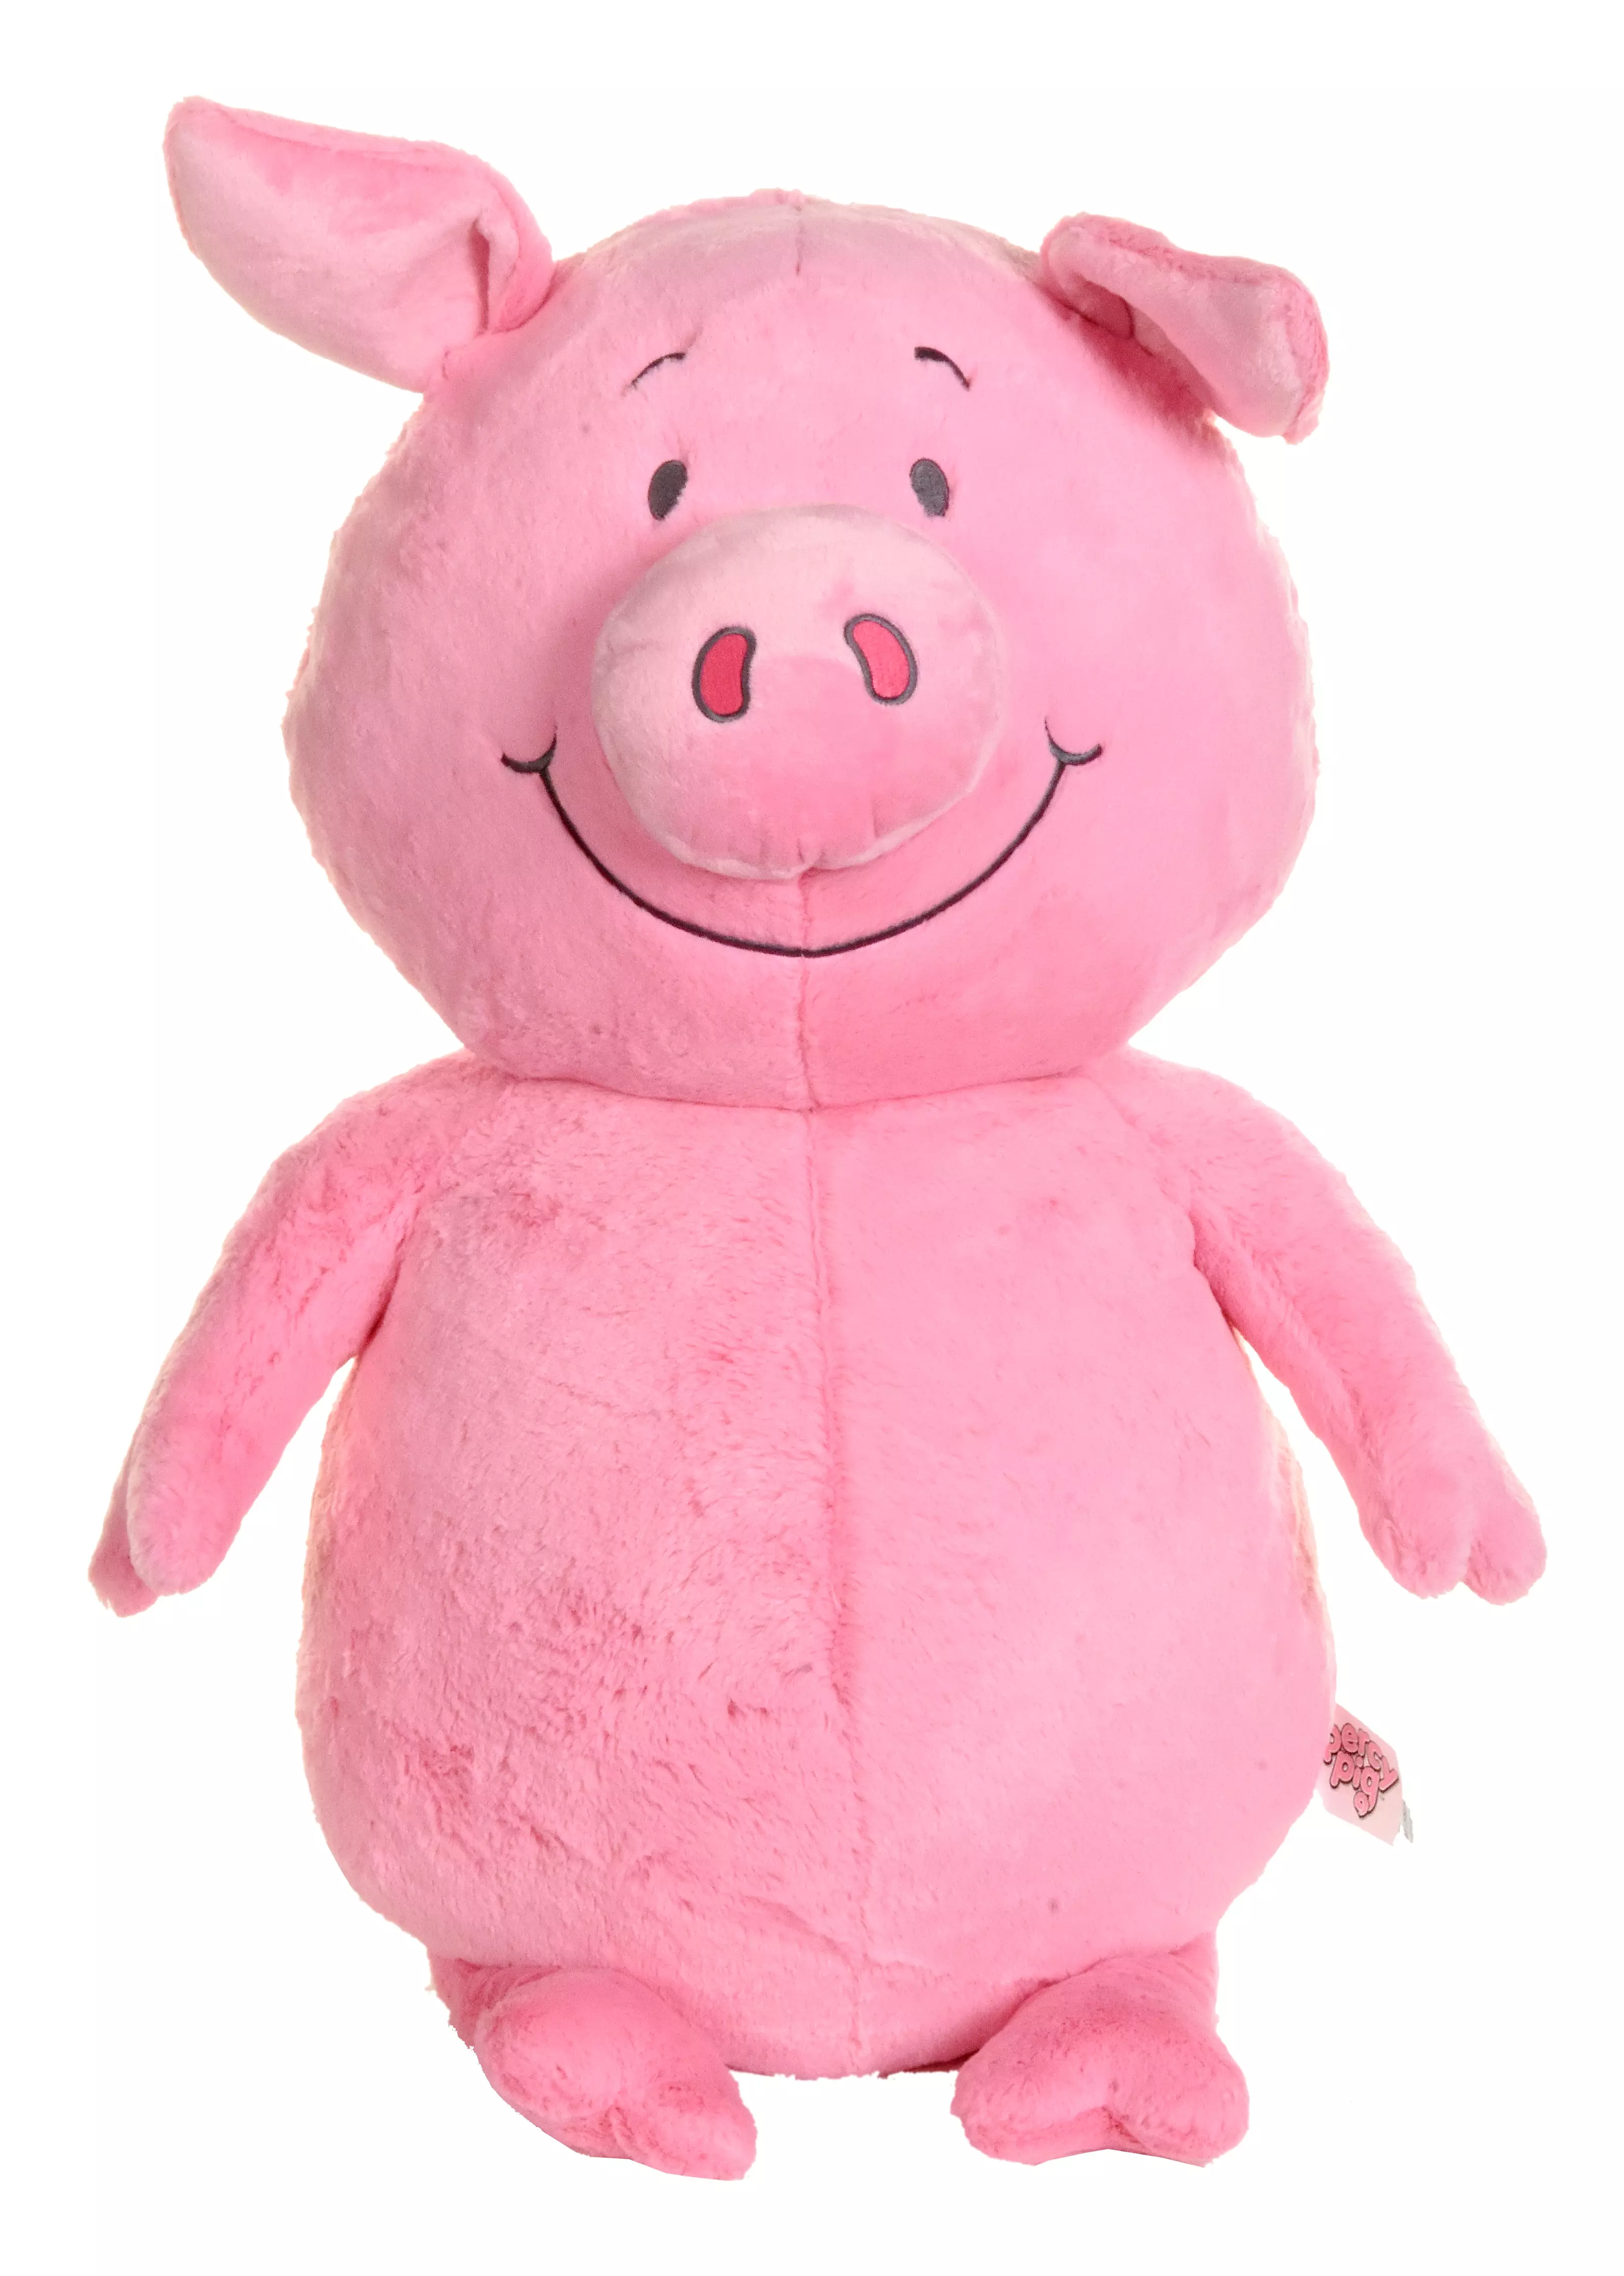 The larger limited-edition Giant Percy Pig Toy costs £25 (